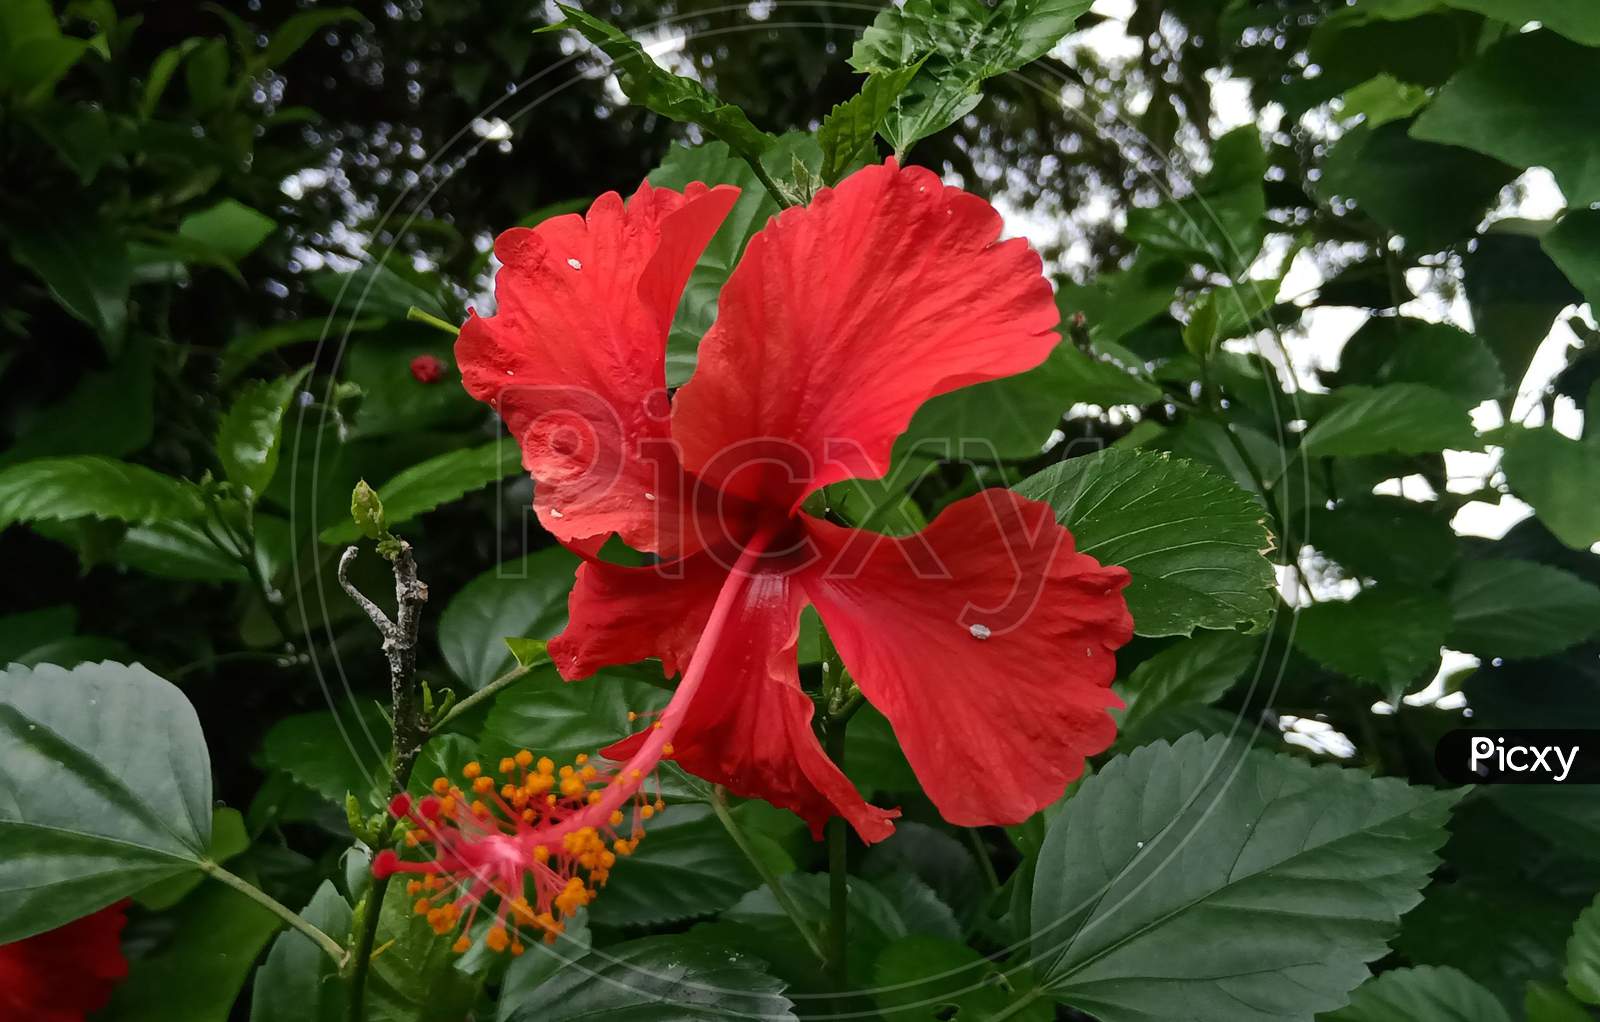 Red hibiscus flower on plant